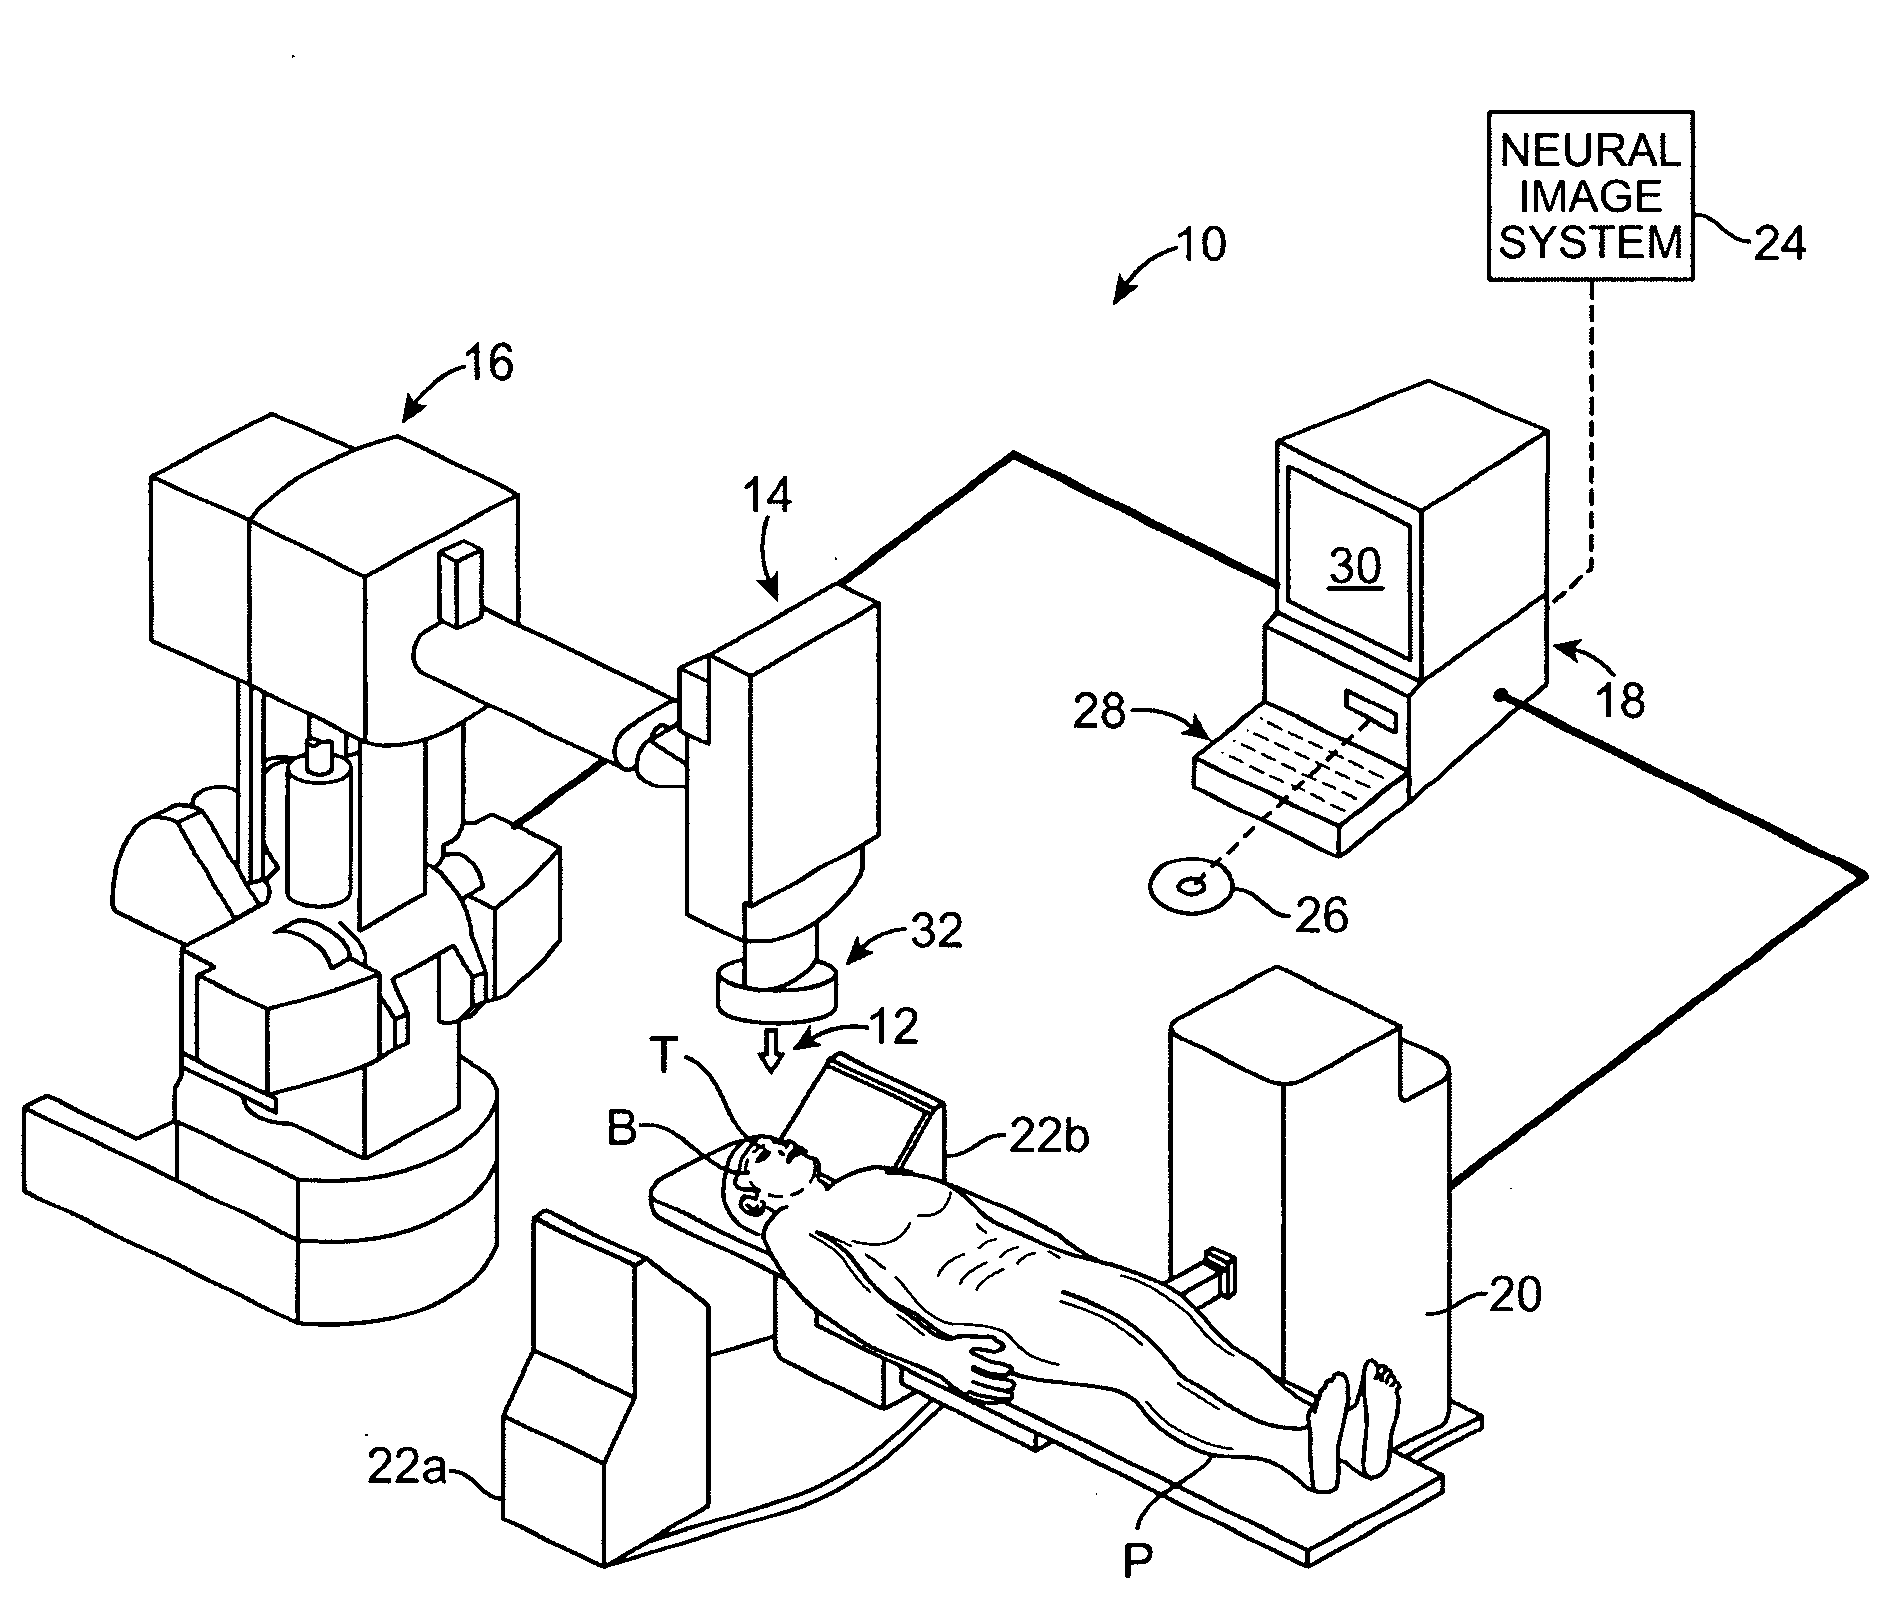 Radiosurgical neuromodulation devices, systems, and methods for treatment of behavioral disorders by external application of ionizing radiation